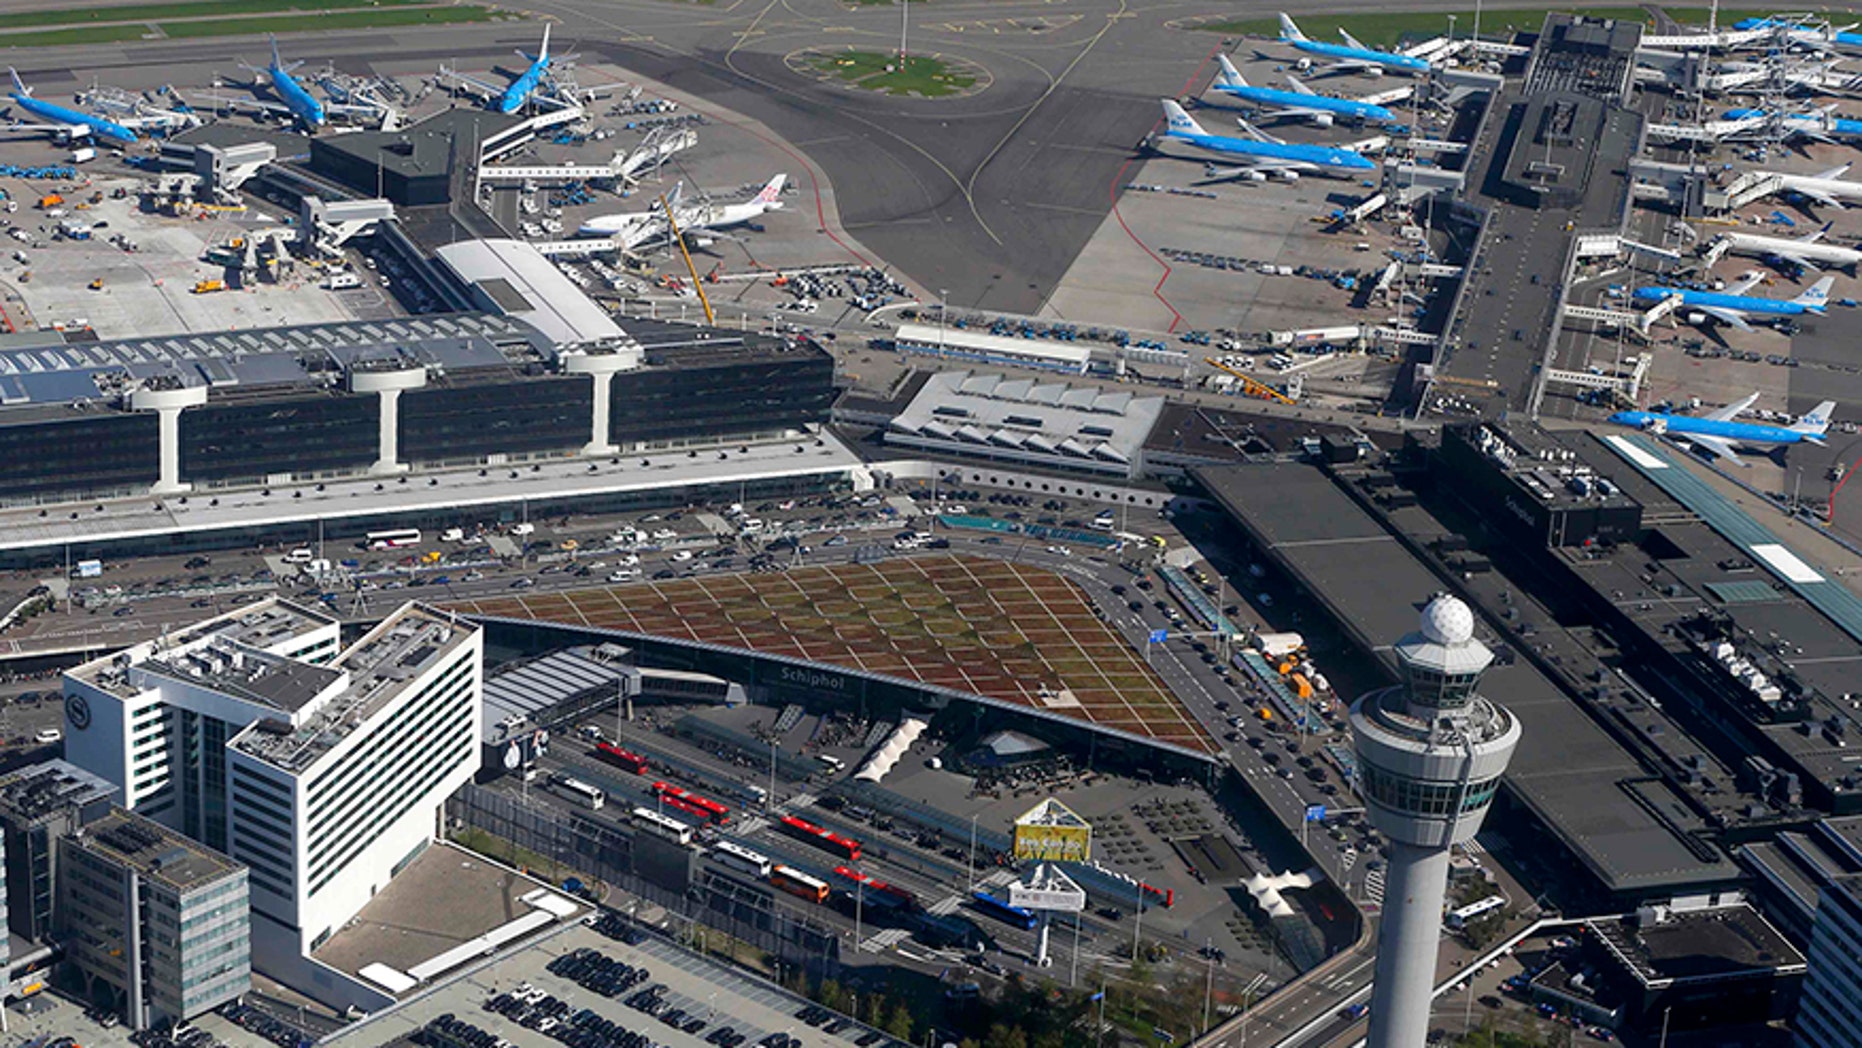 Amsterdam airport departure area evacuated for bomb threat | Fox News